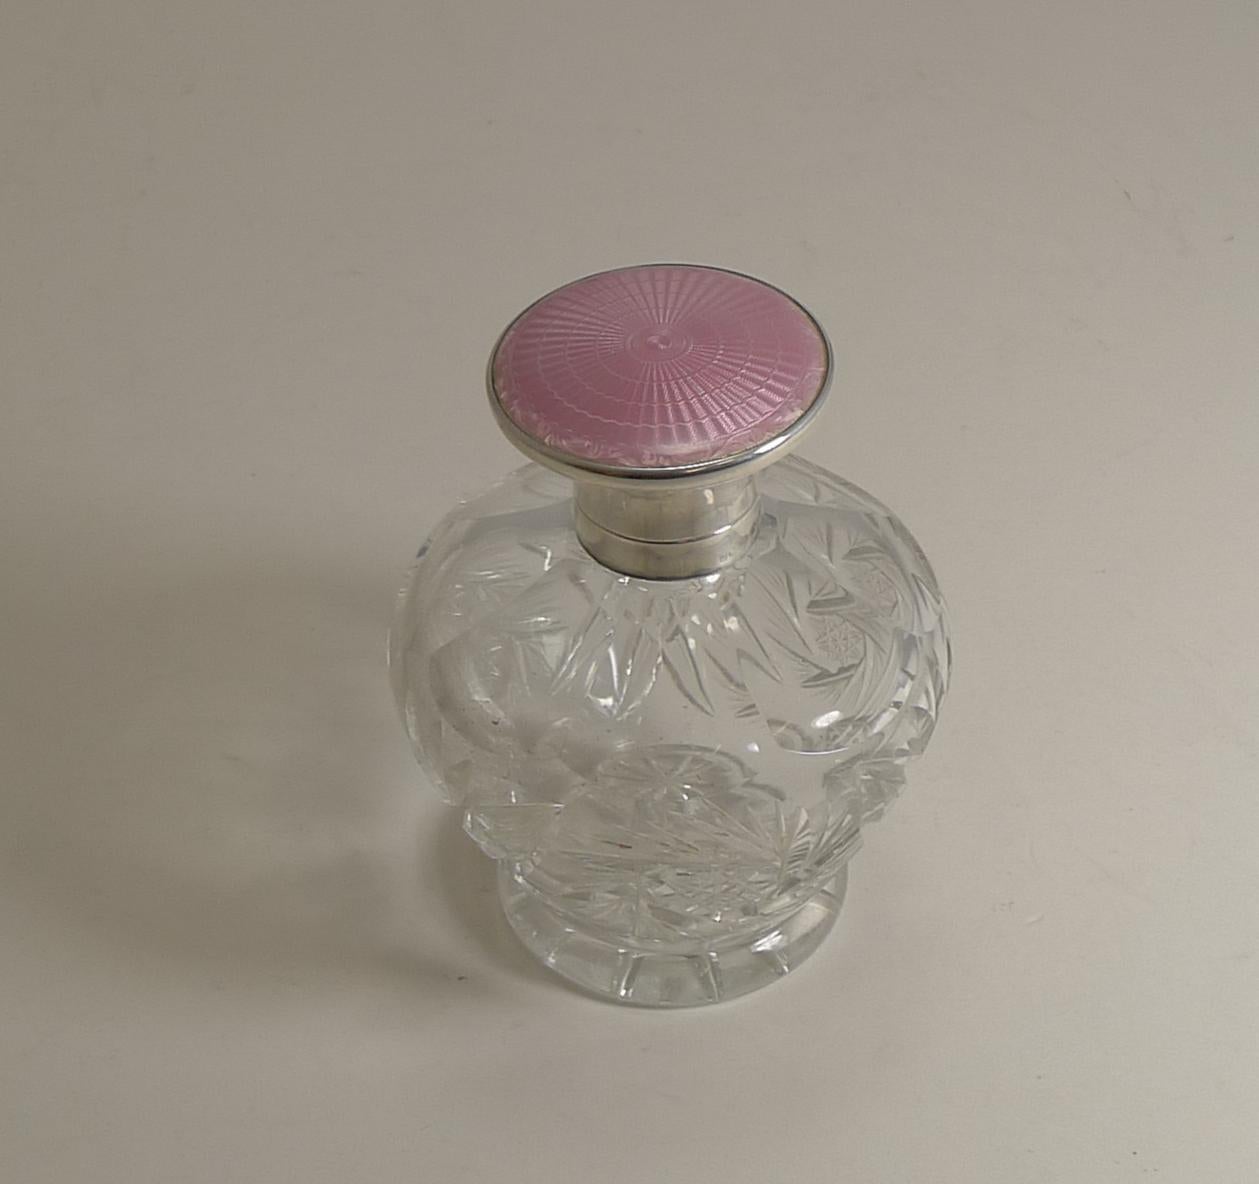 Cut Crystal Perfume Bottle, English Sterling Silver and Pink Guilloche Enamel 4